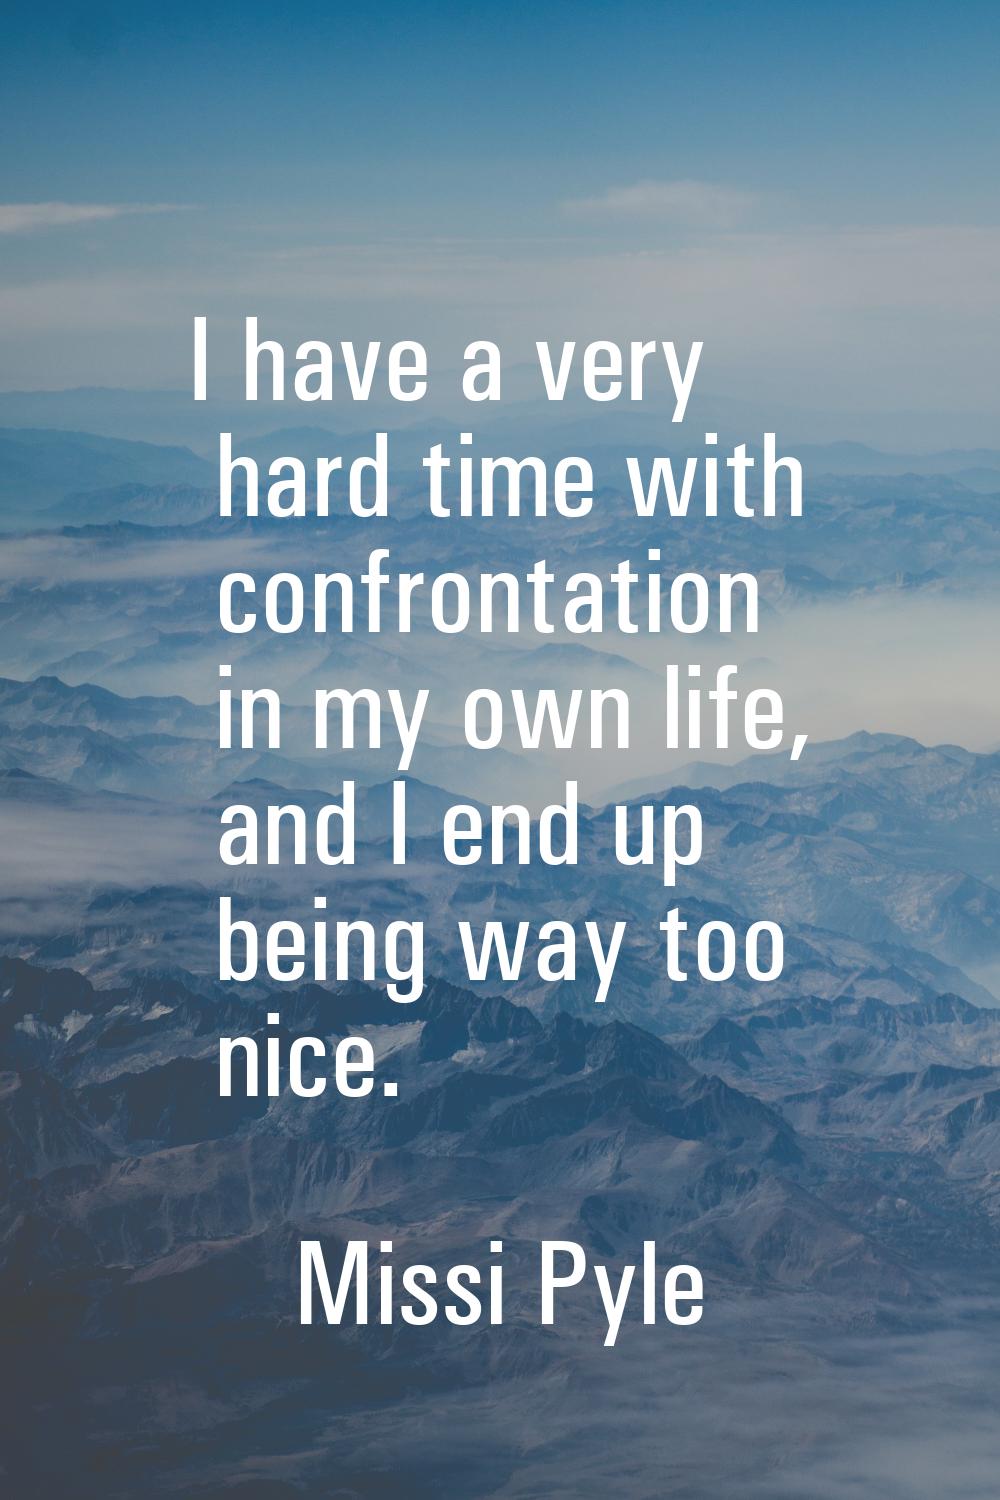 I have a very hard time with confrontation in my own life, and I end up being way too nice.